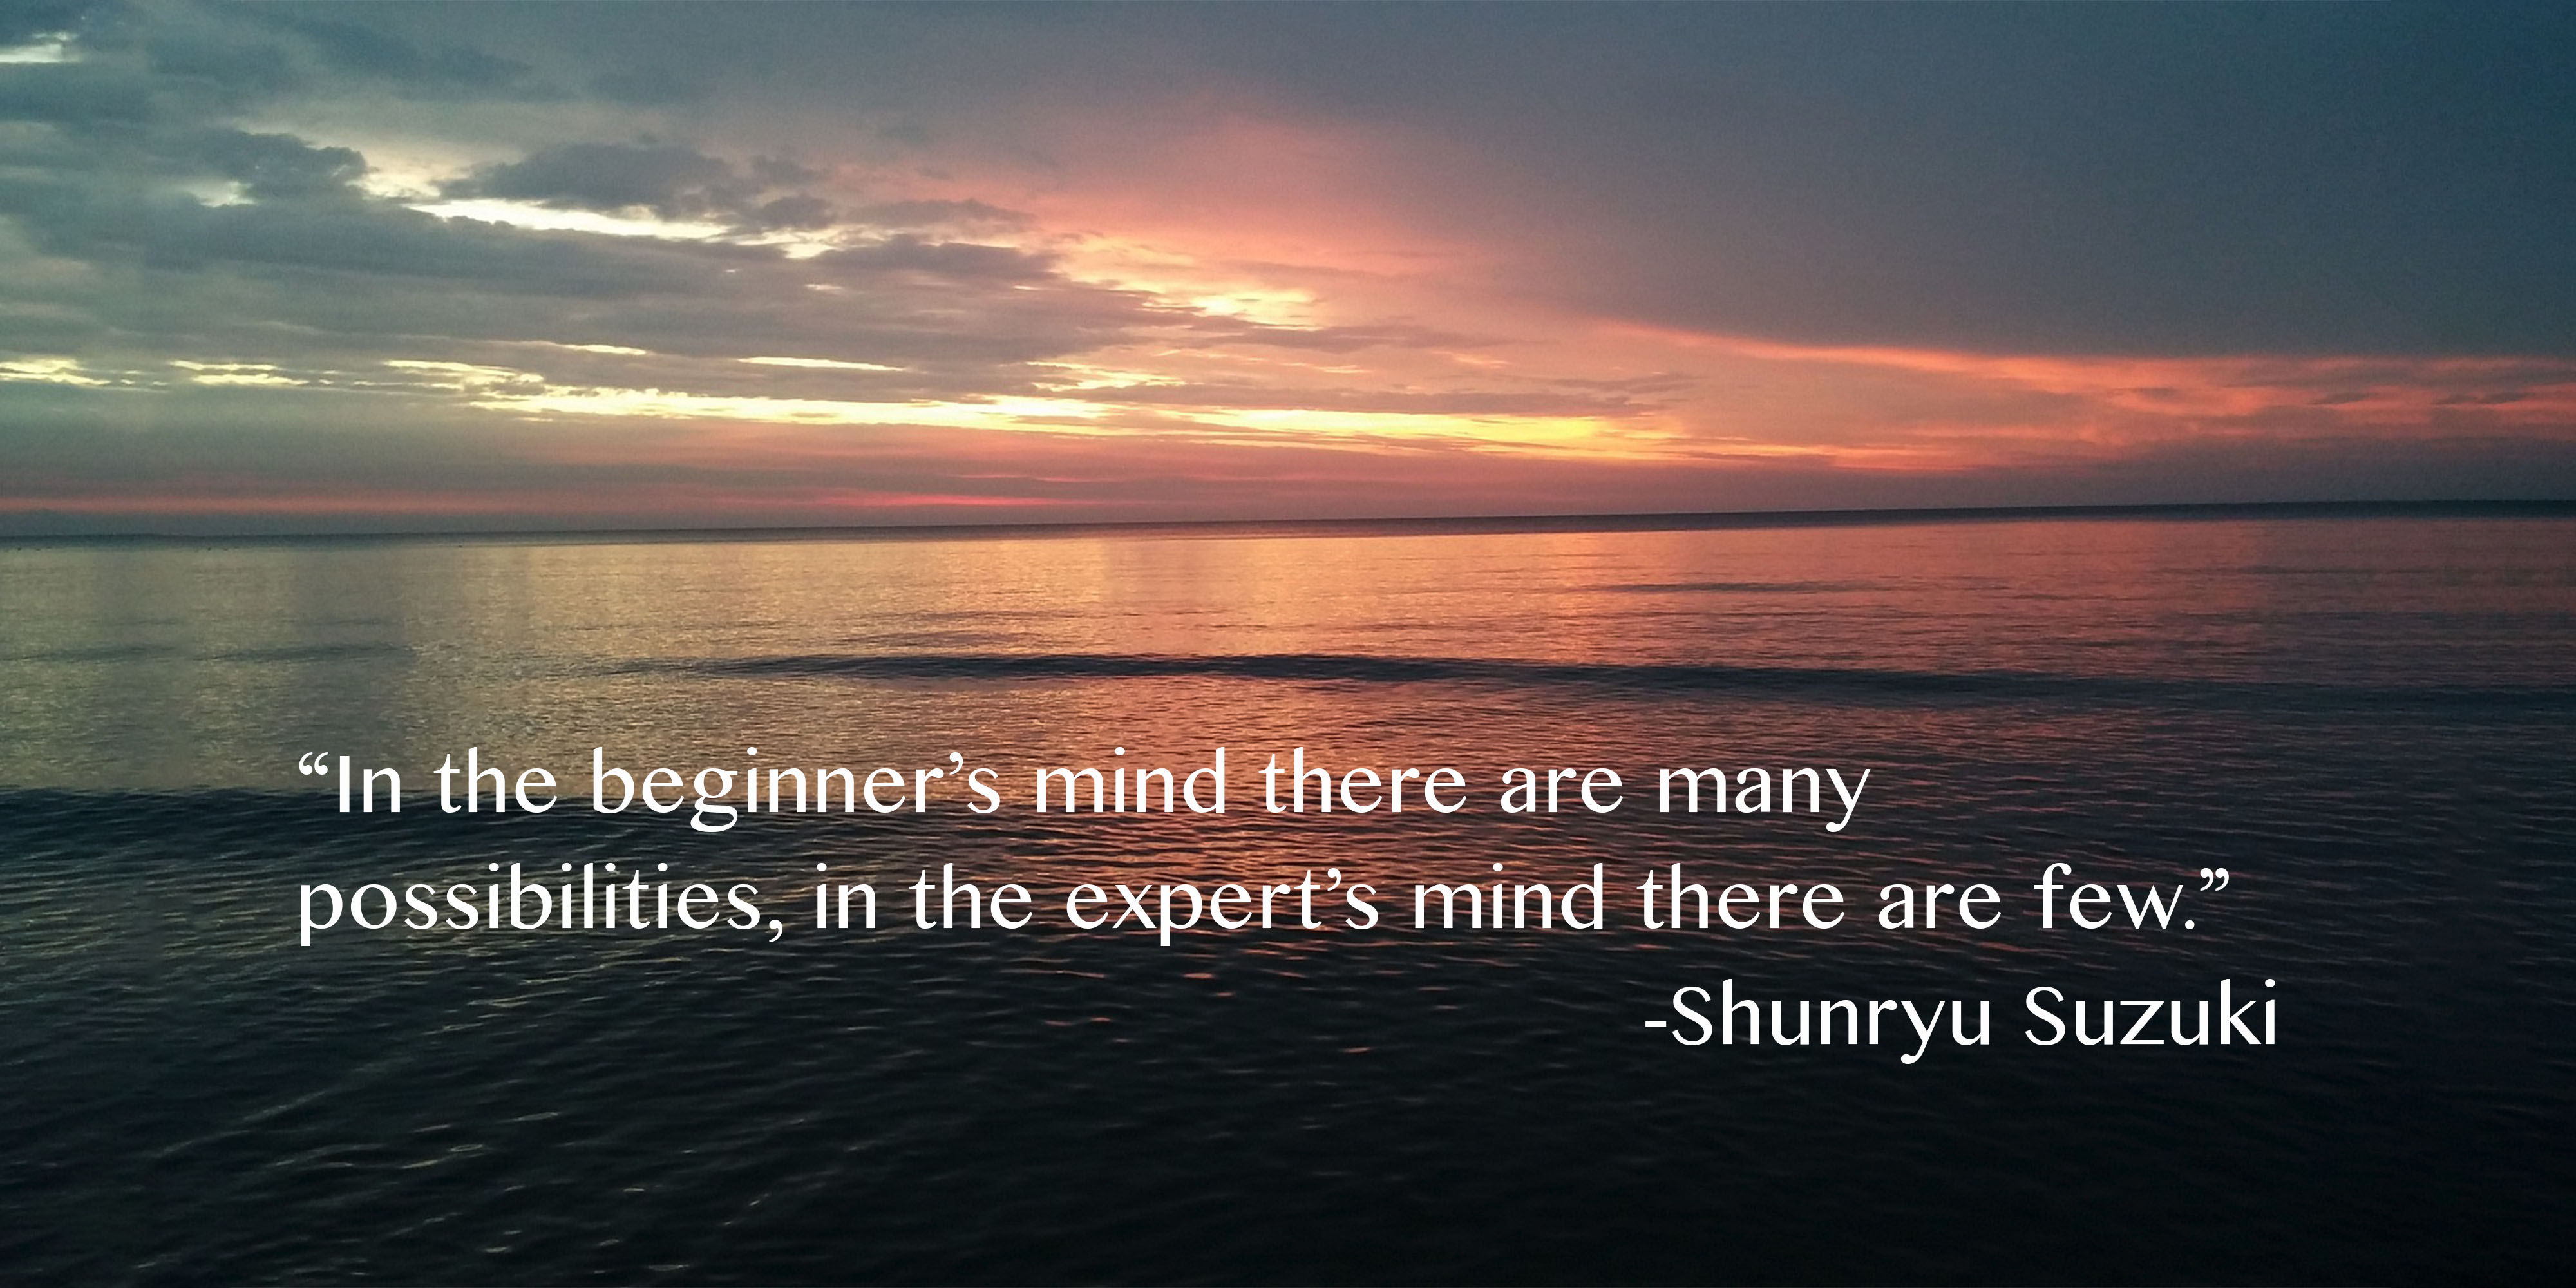 “In the beginner’s mind there are many possibilities, in the expert’s mind there are few.”